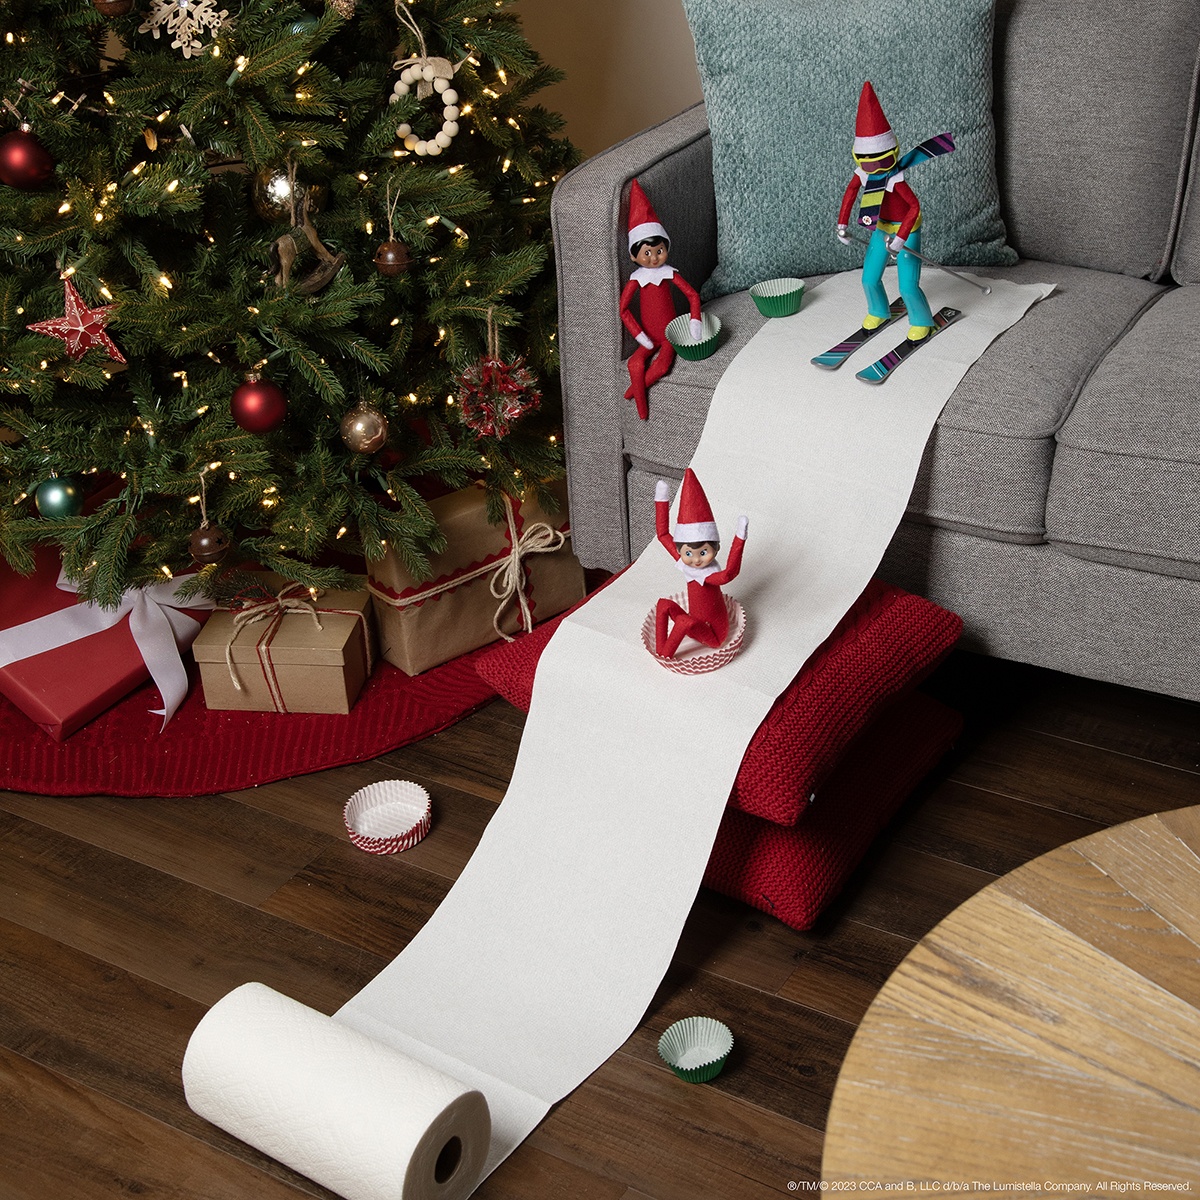 The Elf on the Shelf and friends skiing using a snow hill made of paper towels and sleds made of cupcake wrapping papers